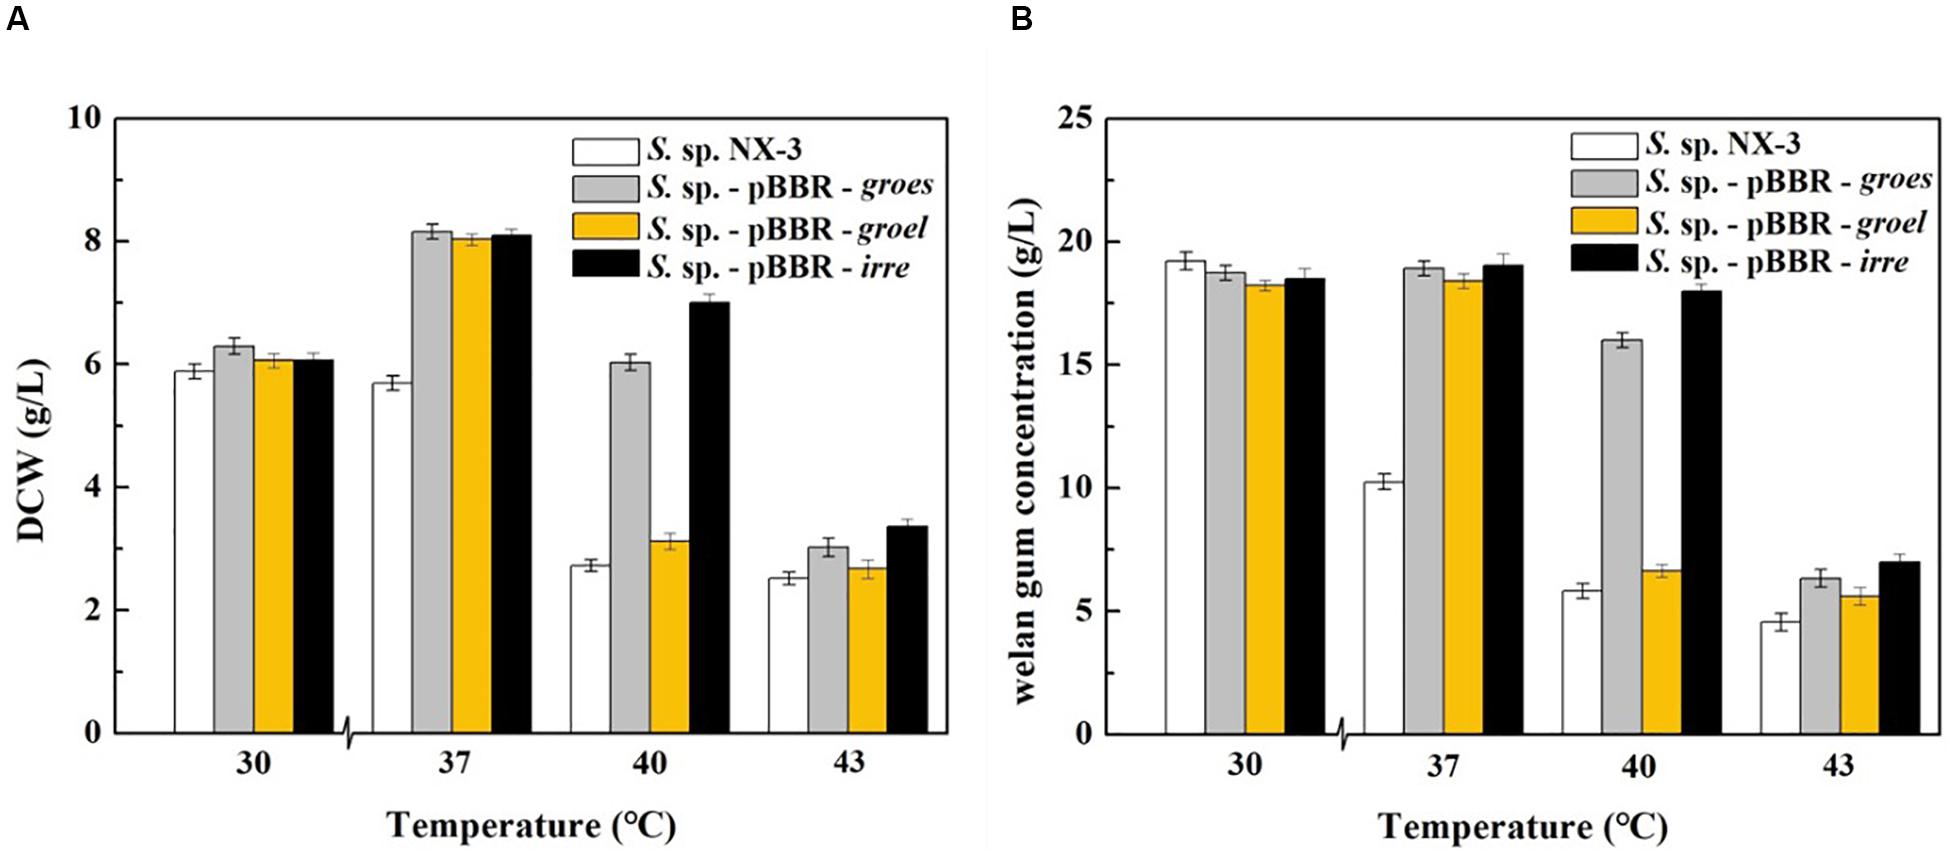 Frontiers Construction Of A Robust Sphingomonas Sp Strain For Welan Gum Production Via The Expression Of Global Transcriptional Regulator Irre Bioengineering And Biotechnology